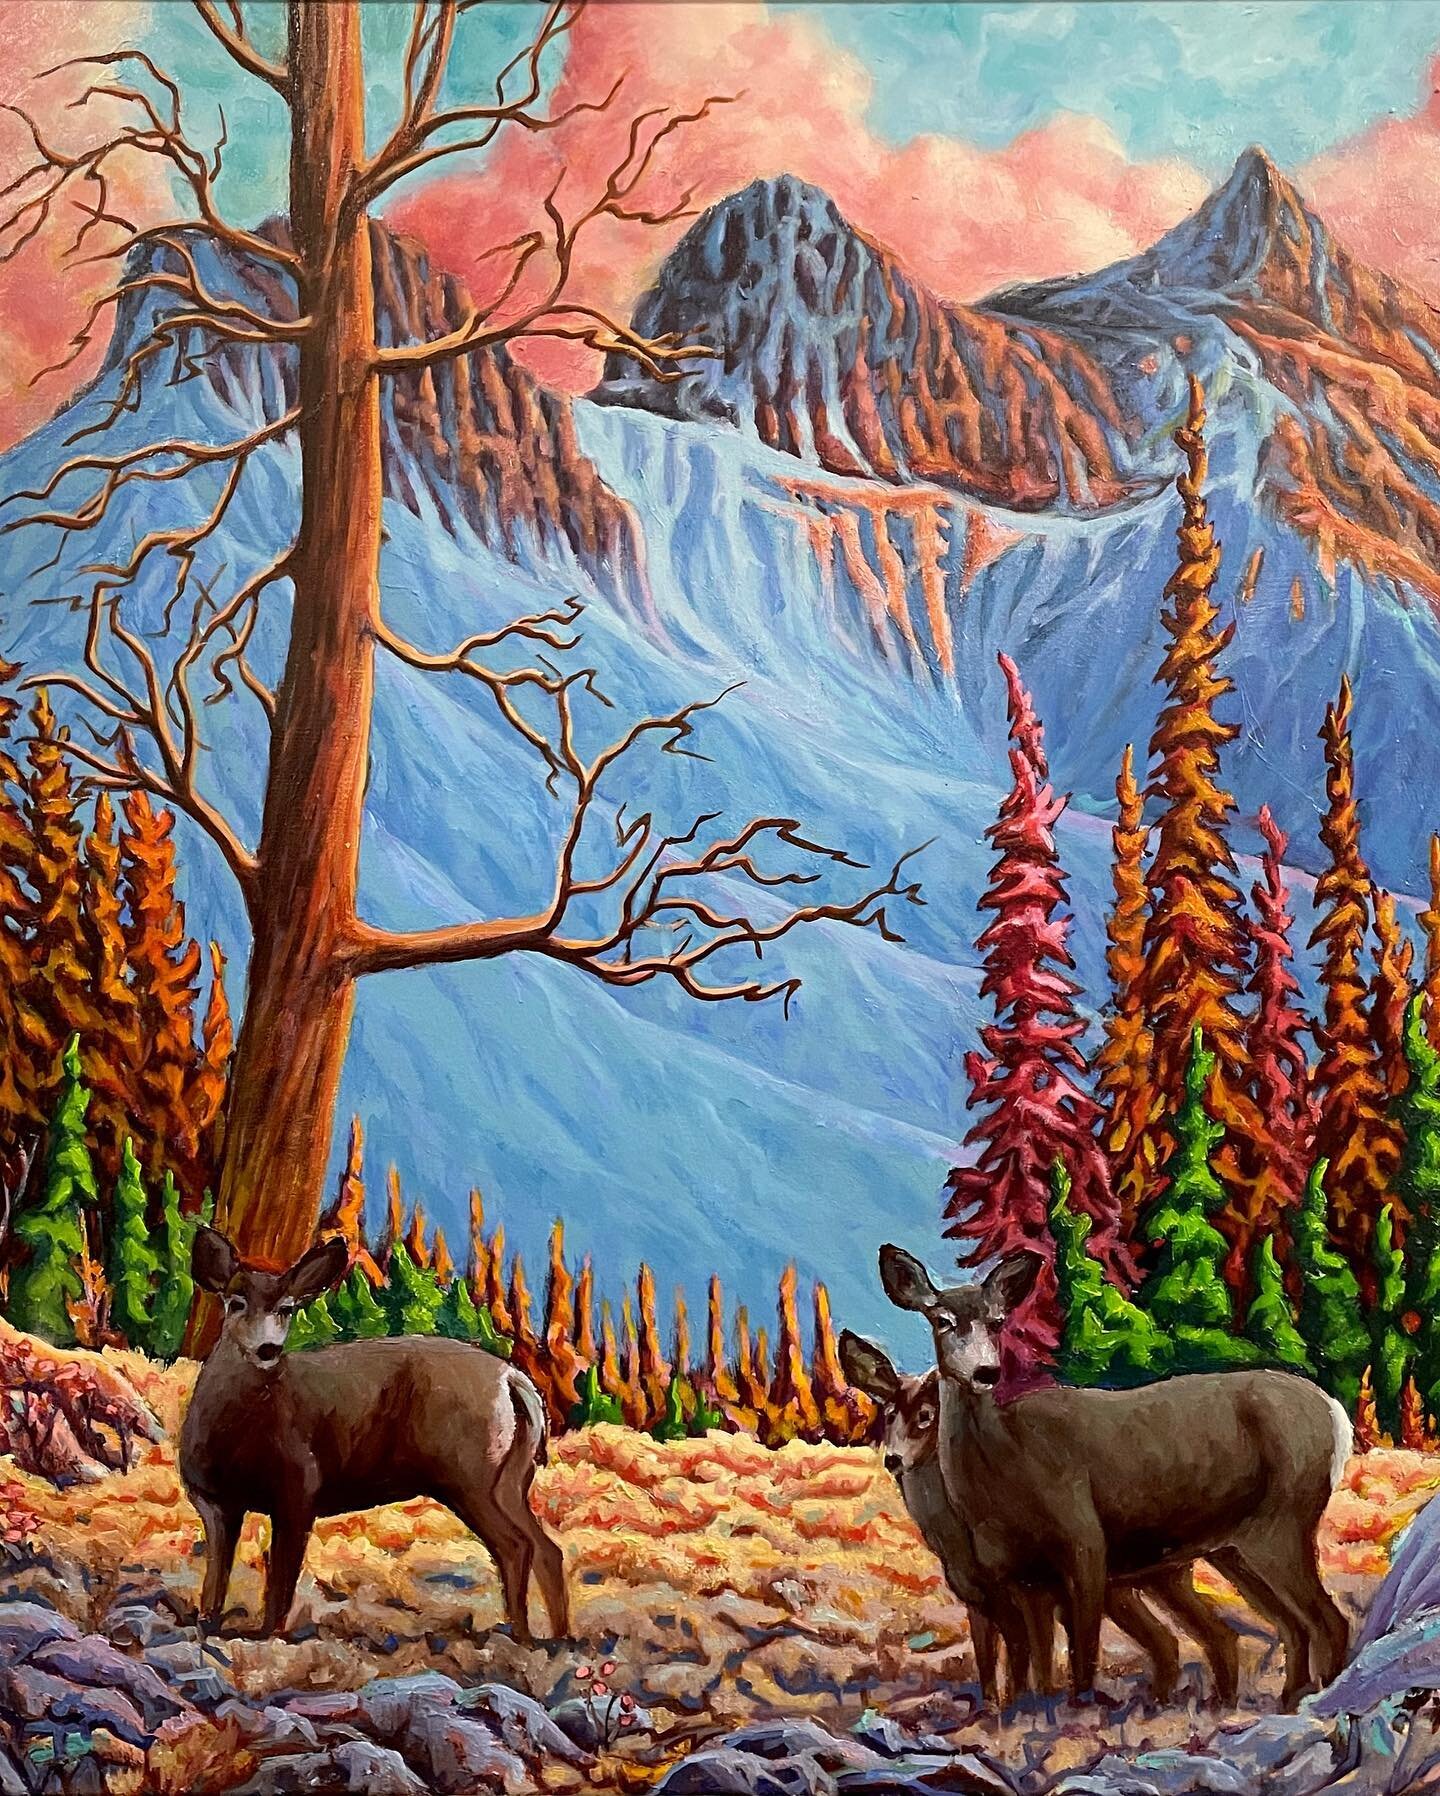 Visit our website to explore Ray&rsquo;s beautiful painting of the Three Sisters, along with many other works of his. Available now at albiartcollective.ca

🖌️ reswirsky
🎨 Three Sisters
🖼️ 30x30 oil on canvas